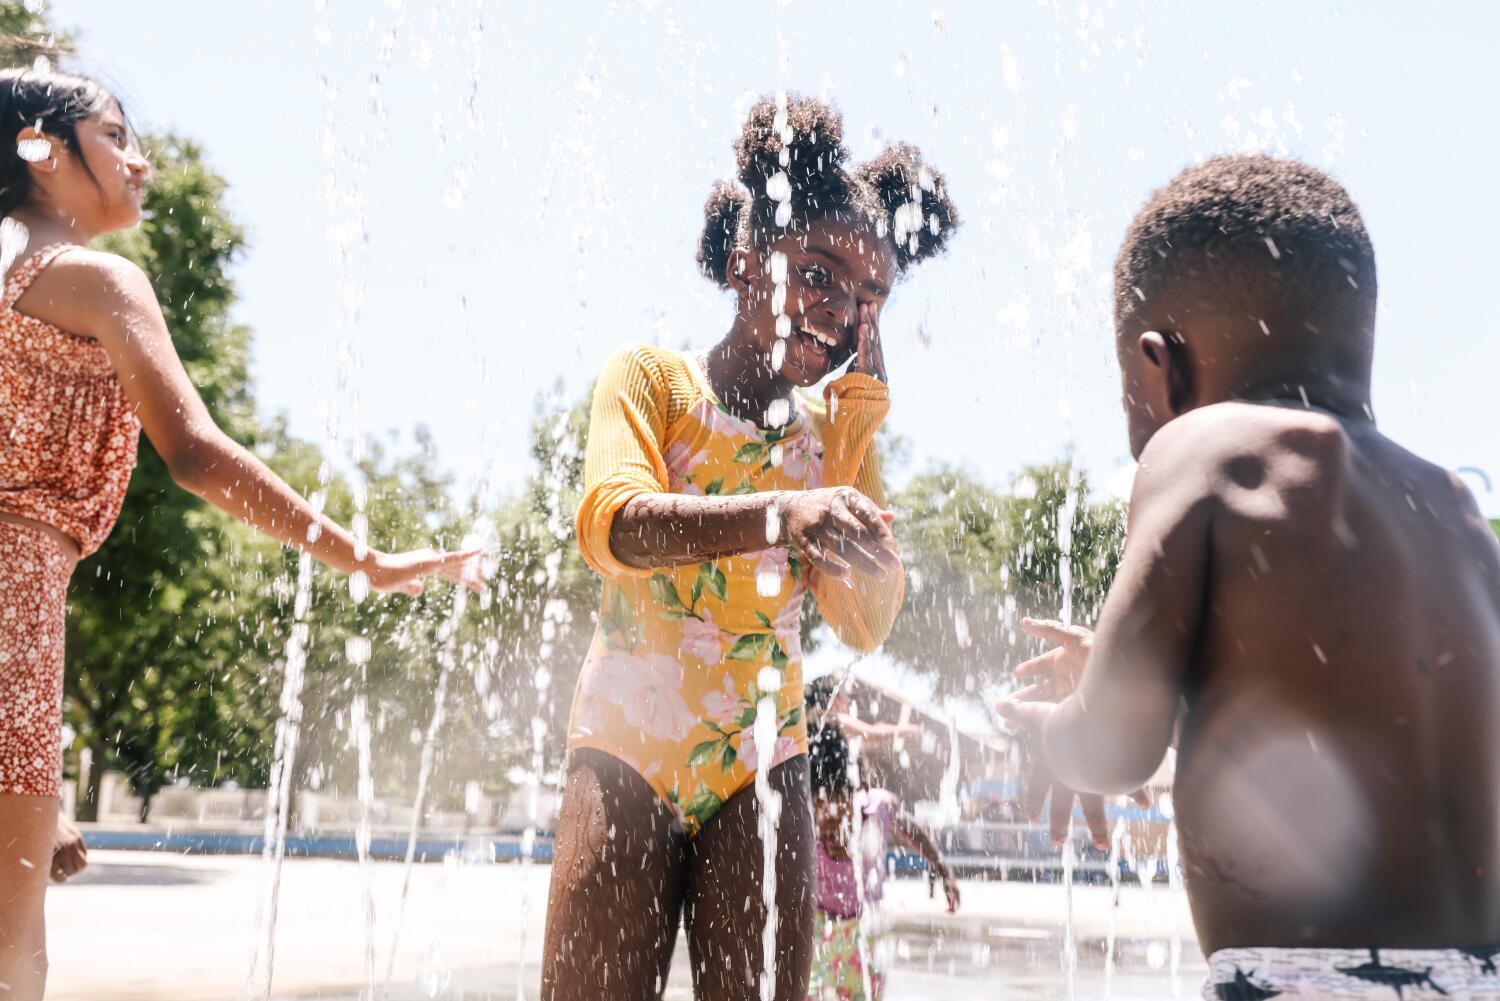 'Unprecedented' heat wave in California brings death, fires, all-time record highs